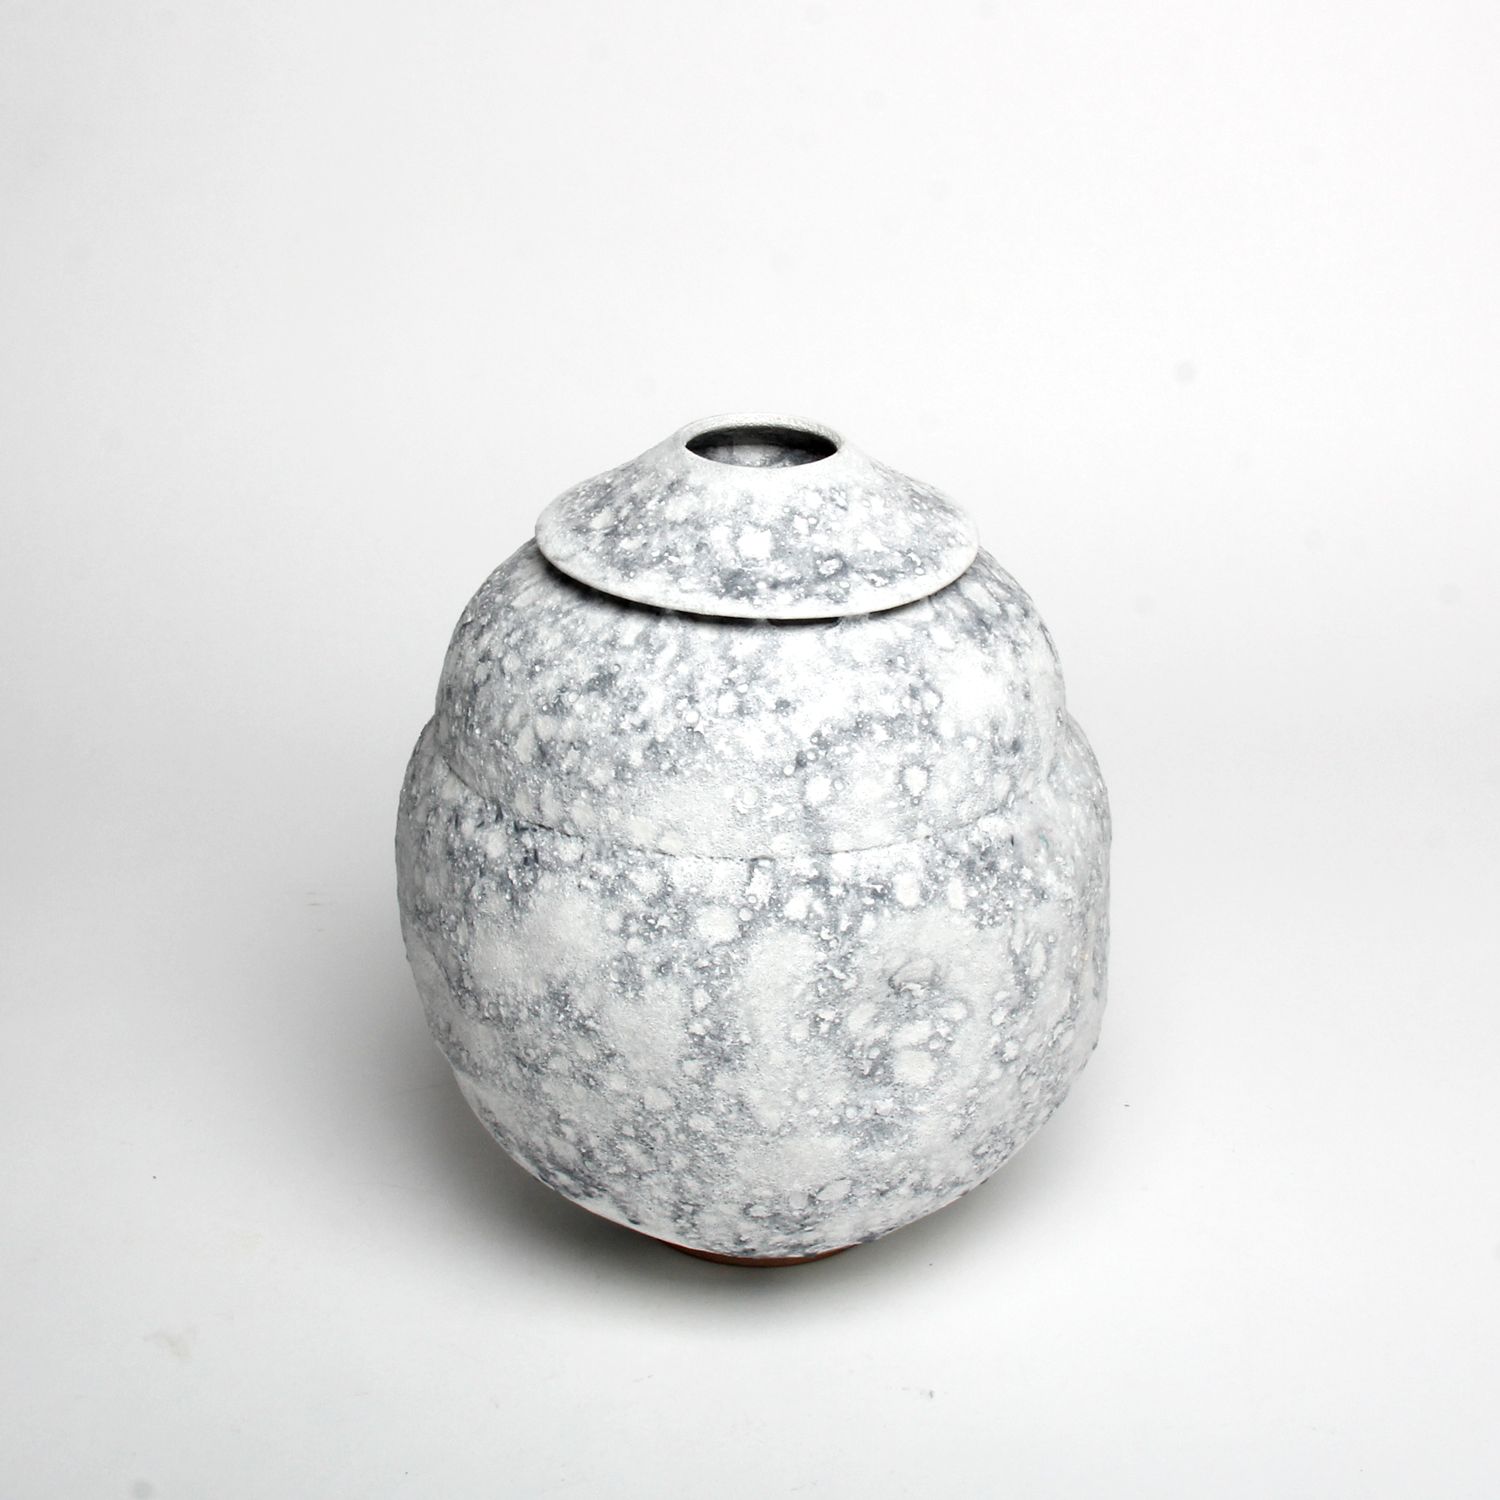 Kayo O’Young: Crater Vase Product Image 1 of 4